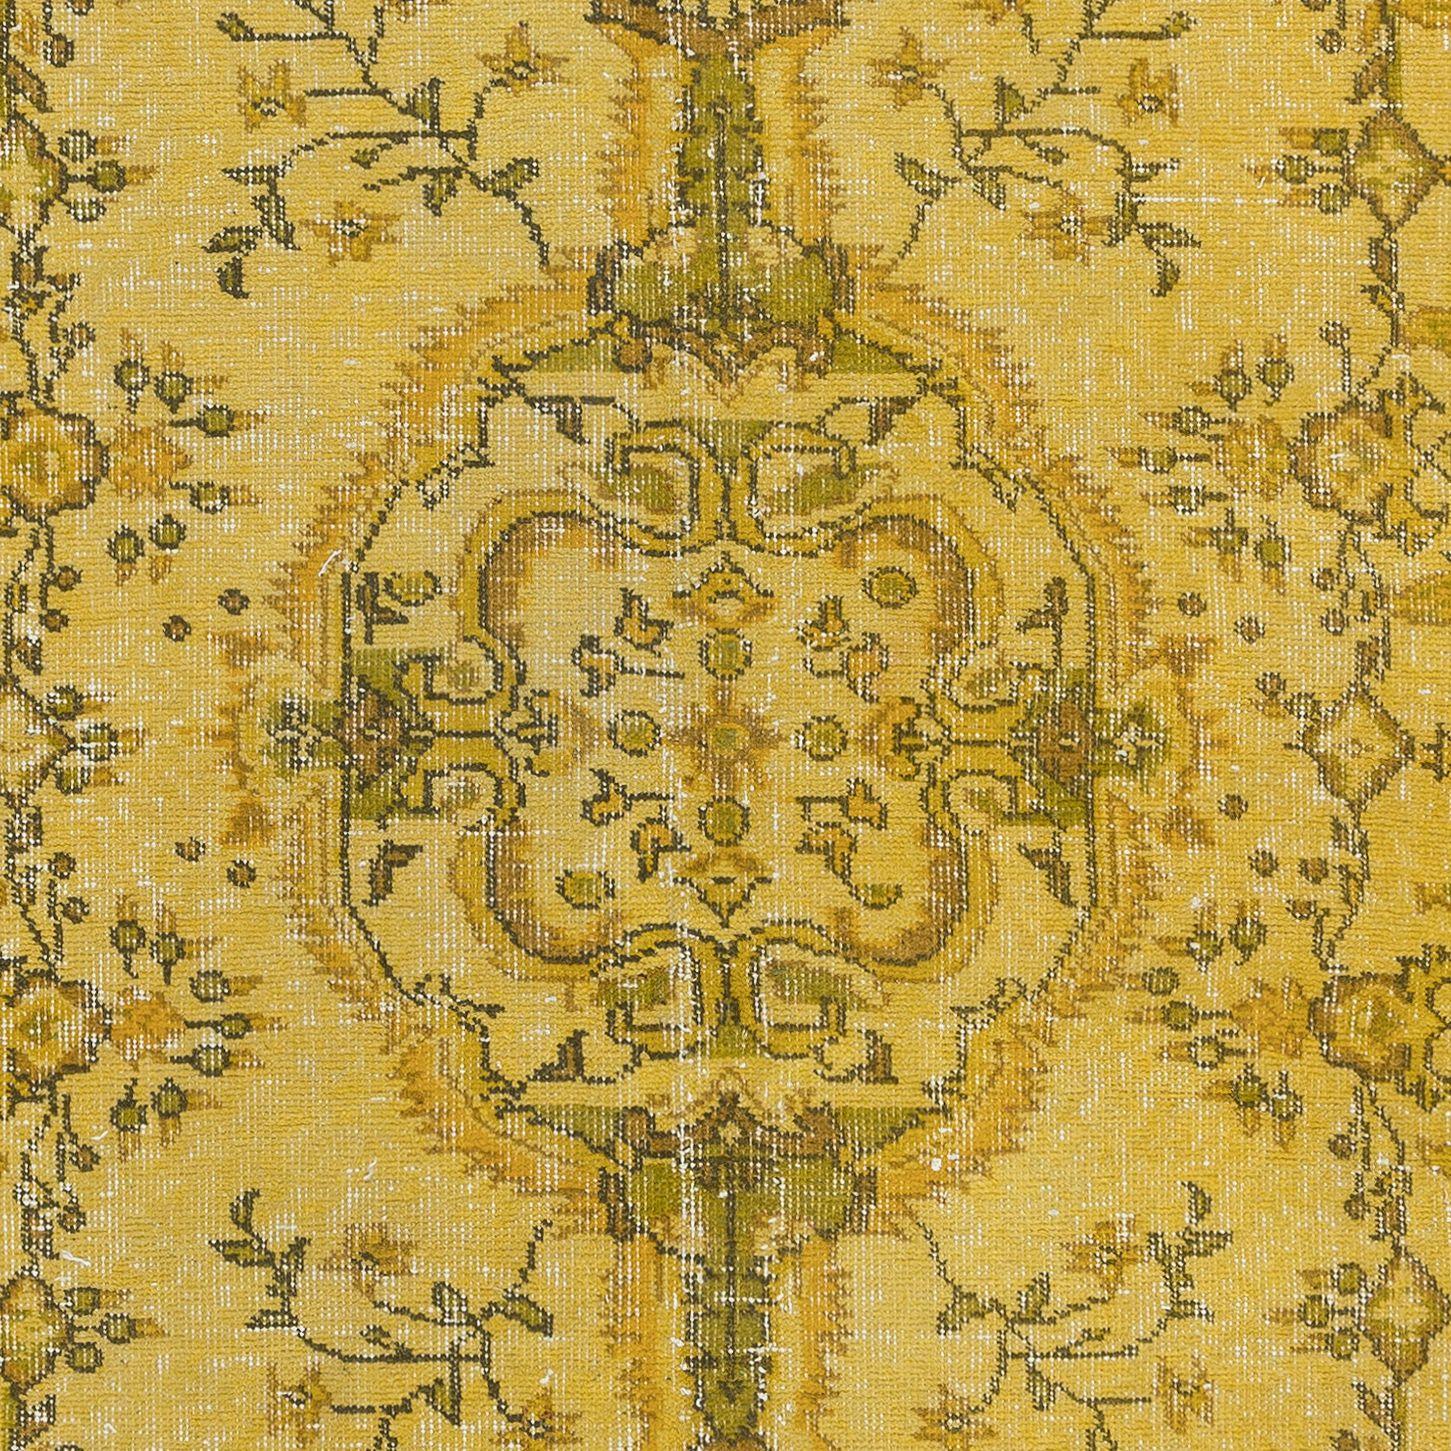 Hand-Woven 3.7x6.6 Ft Modern Handmade Turkish Accent Rug Decorative Yellow Over-Dyed Carpet For Sale